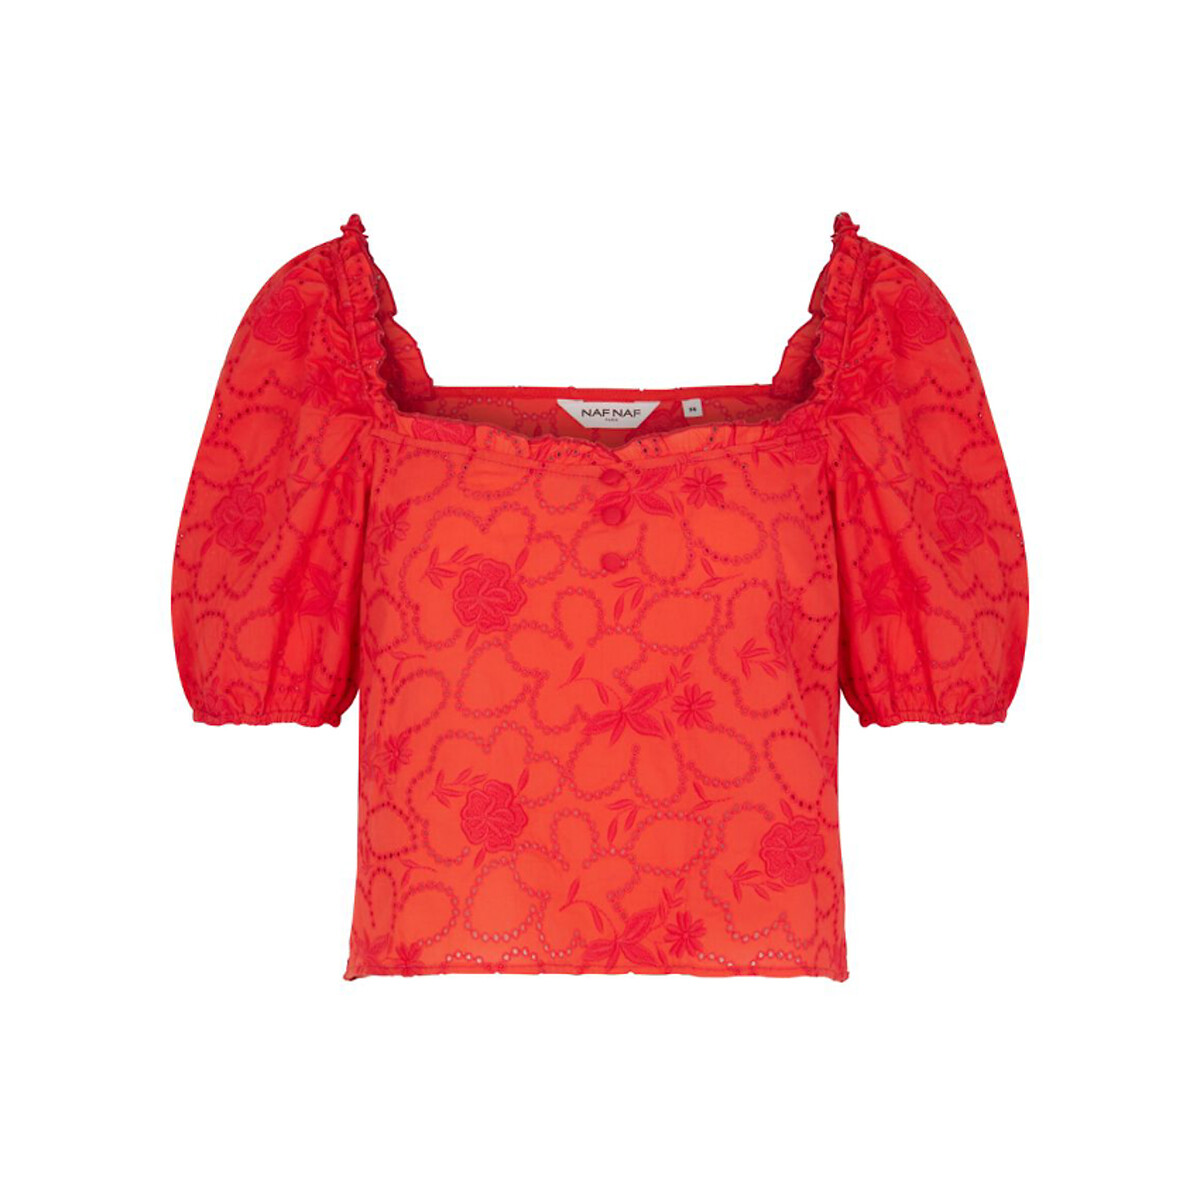 broderie anglaise top with square neck